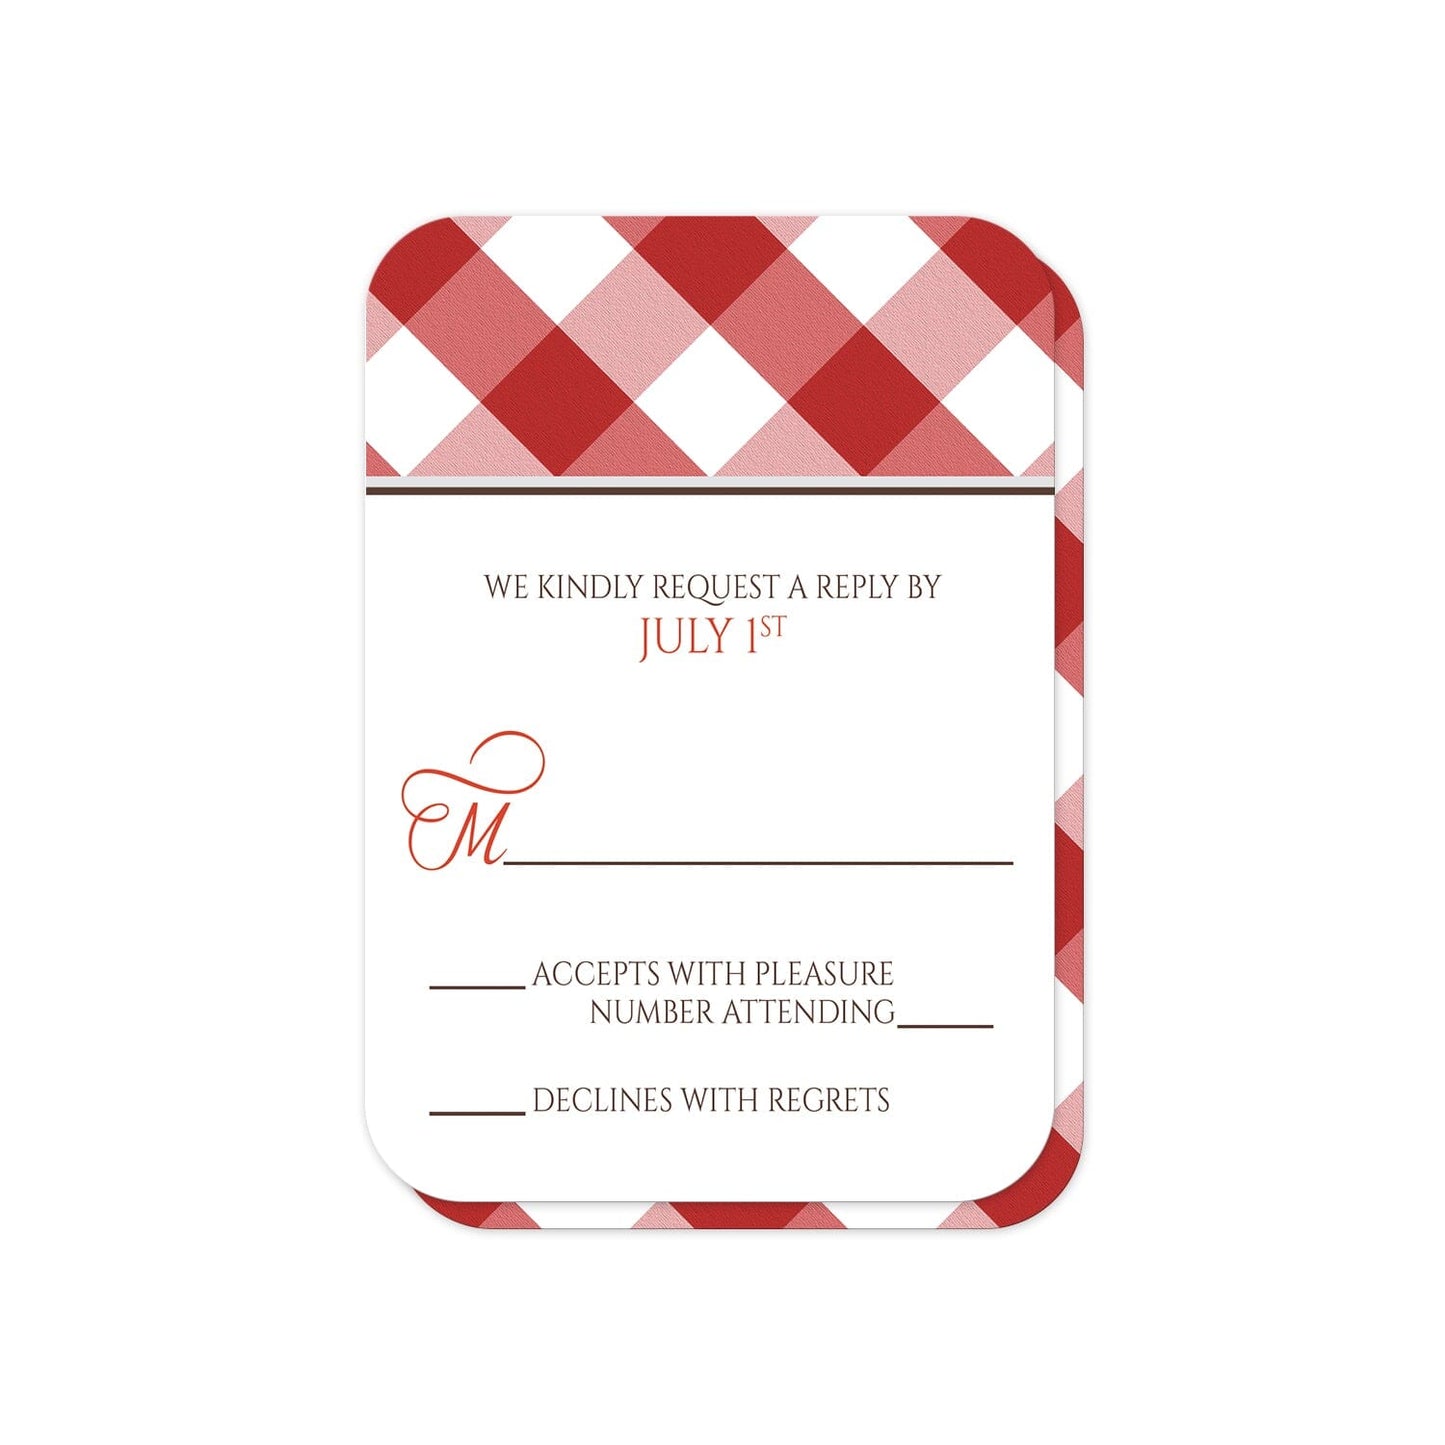 Red Gingham I Do BBQ RSVP Cards (with rounded corners) at Artistically Invited.